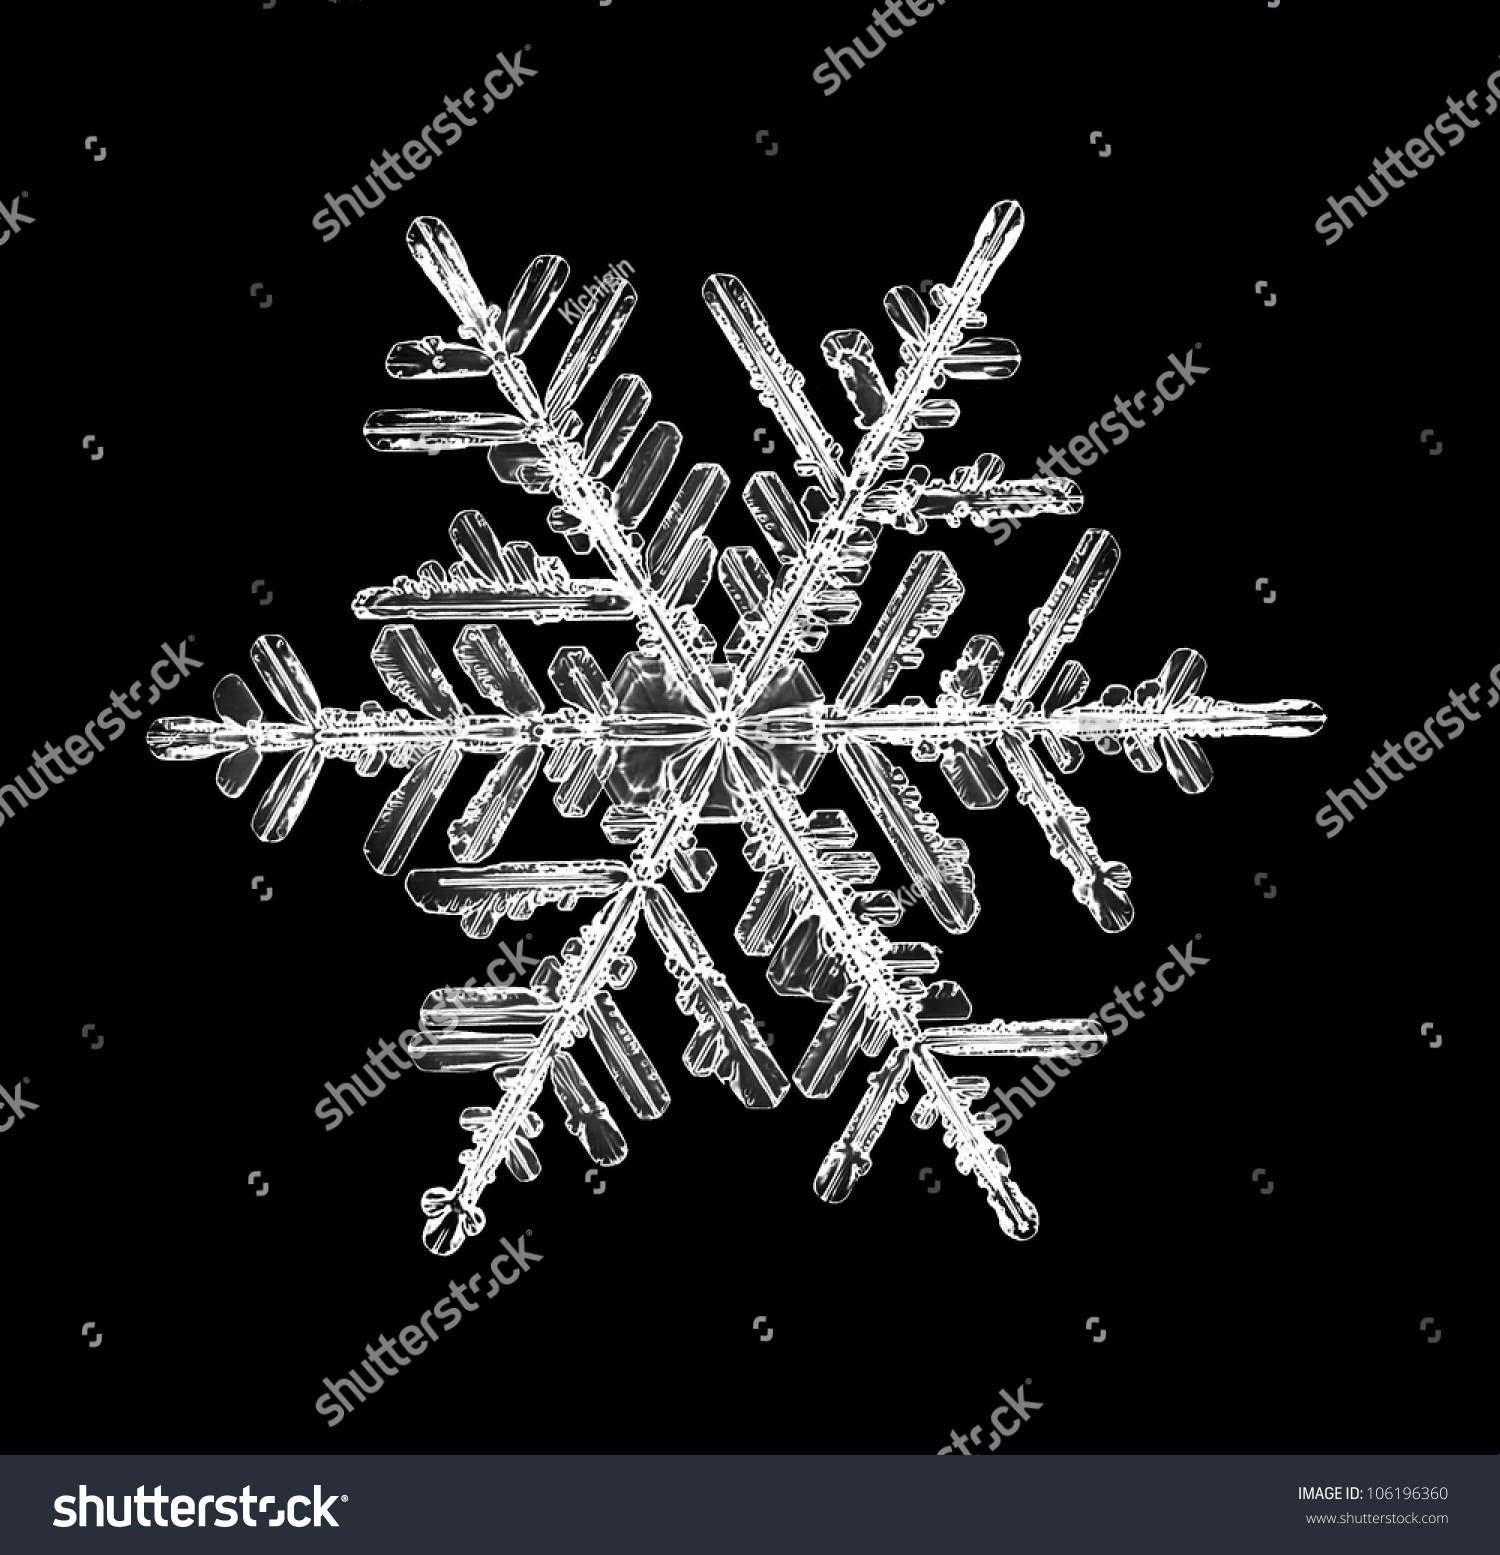 Snowflake Isolated On Black Background Natural Stock Photo 106196360